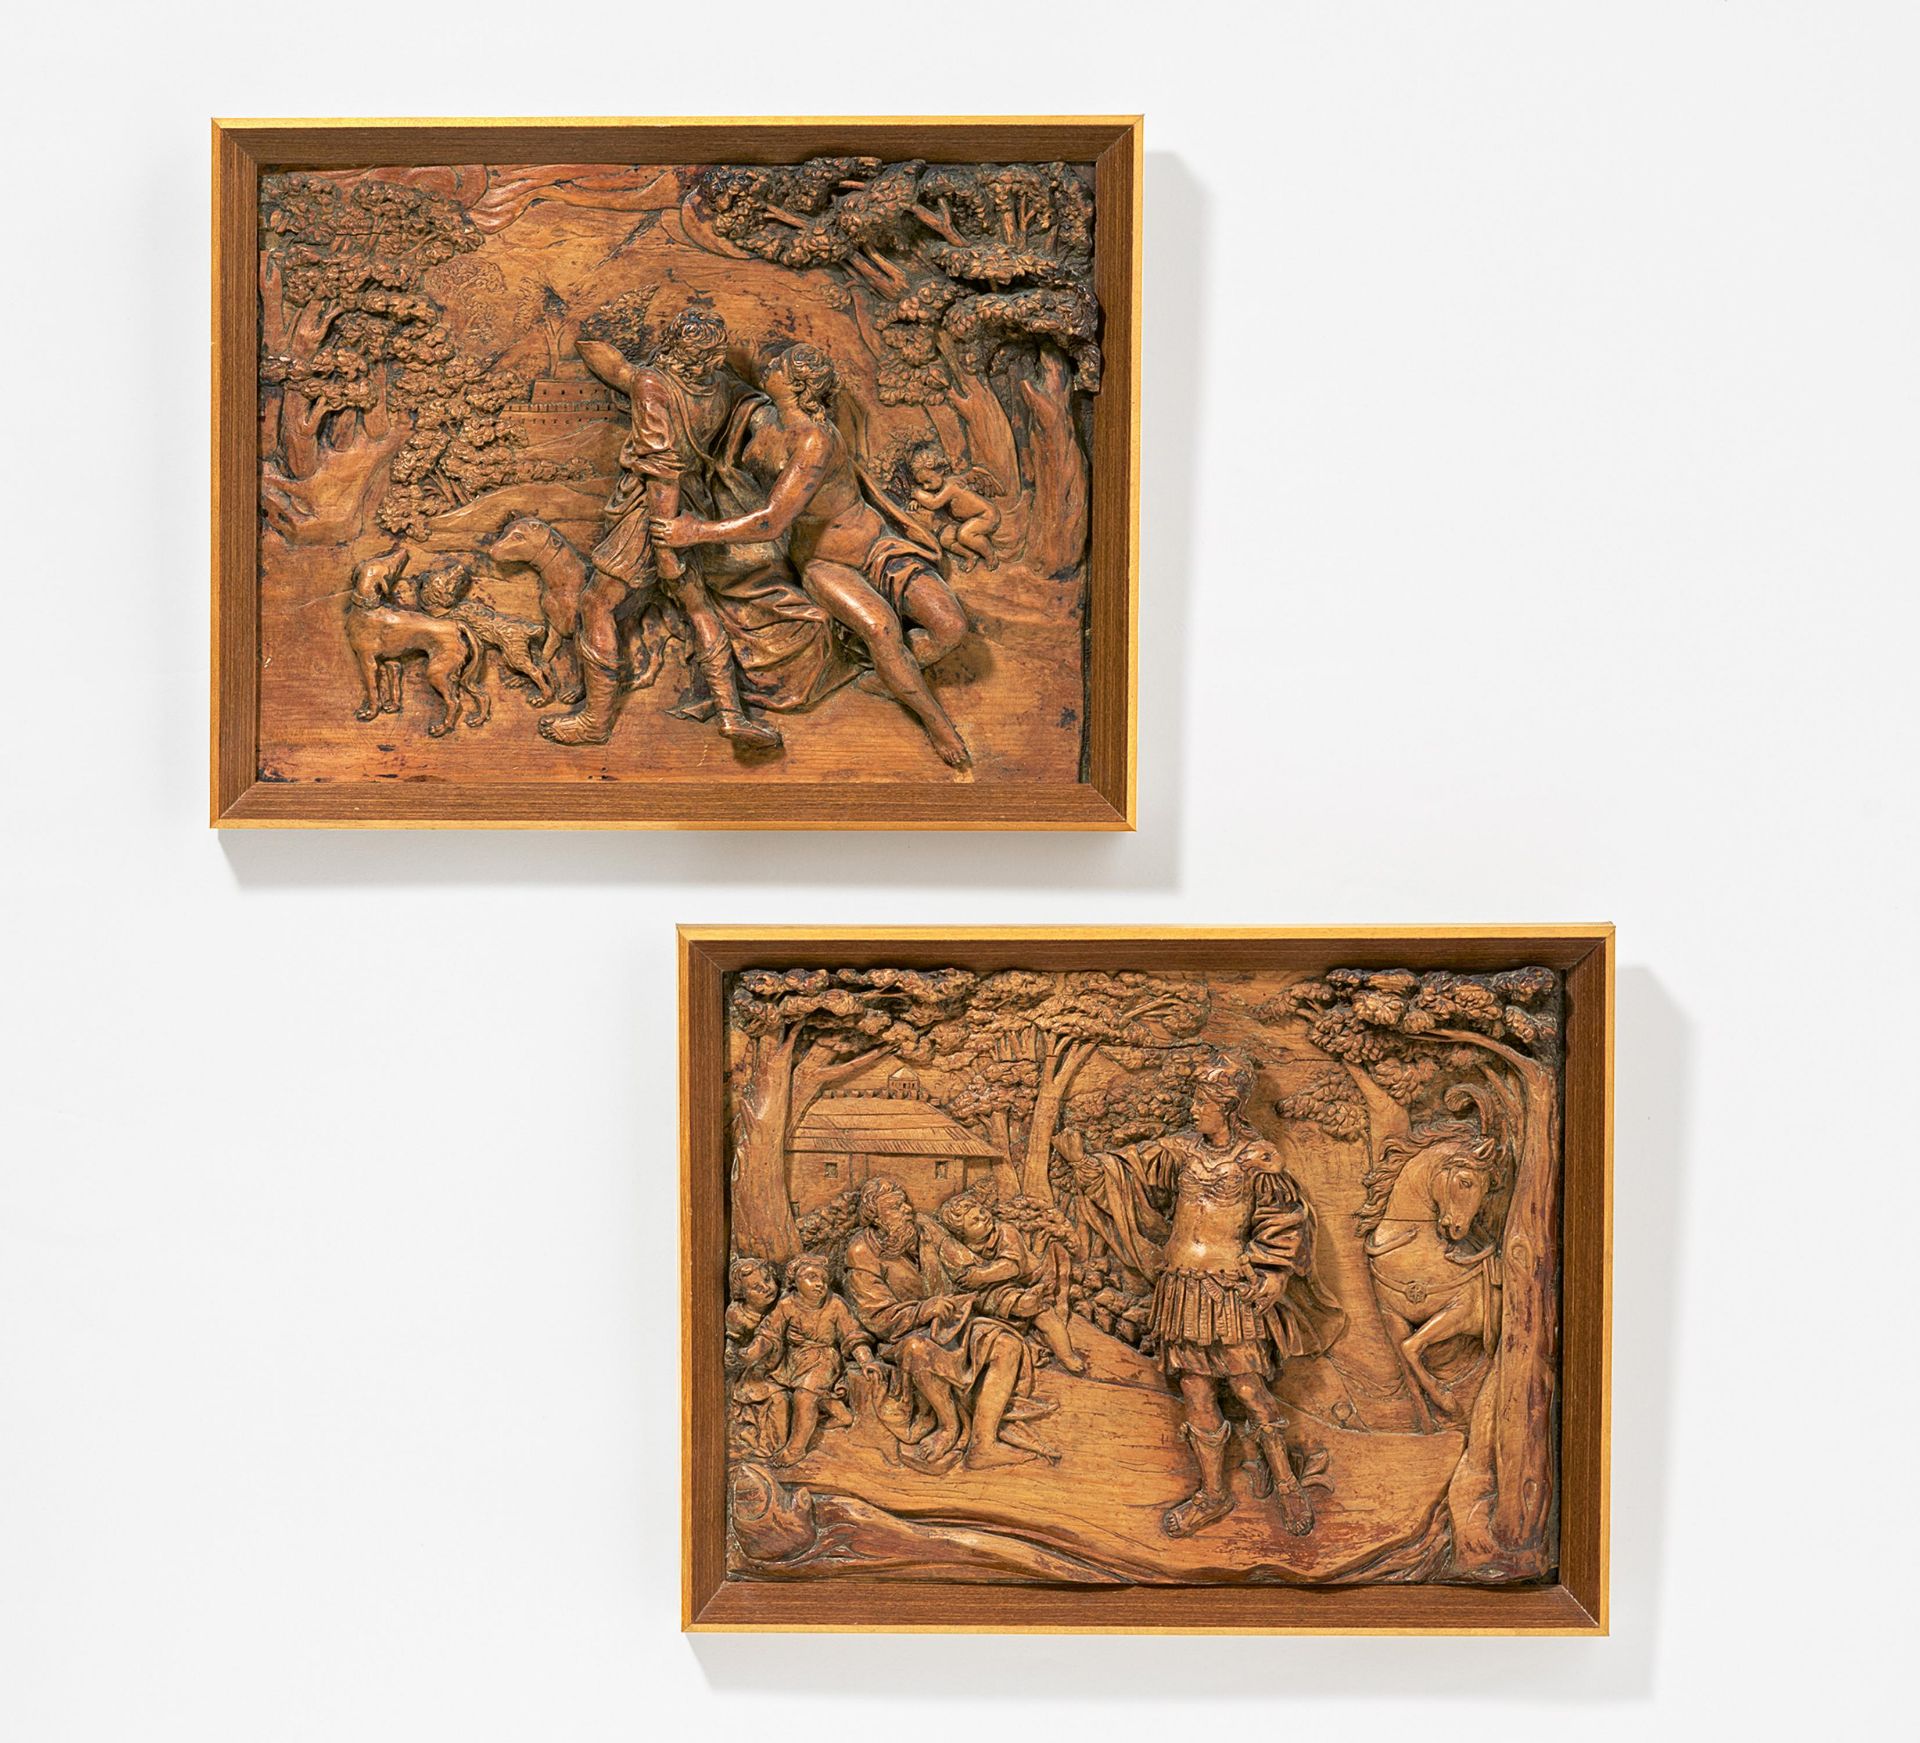 Pair of wooden reliefs with mythological scenes